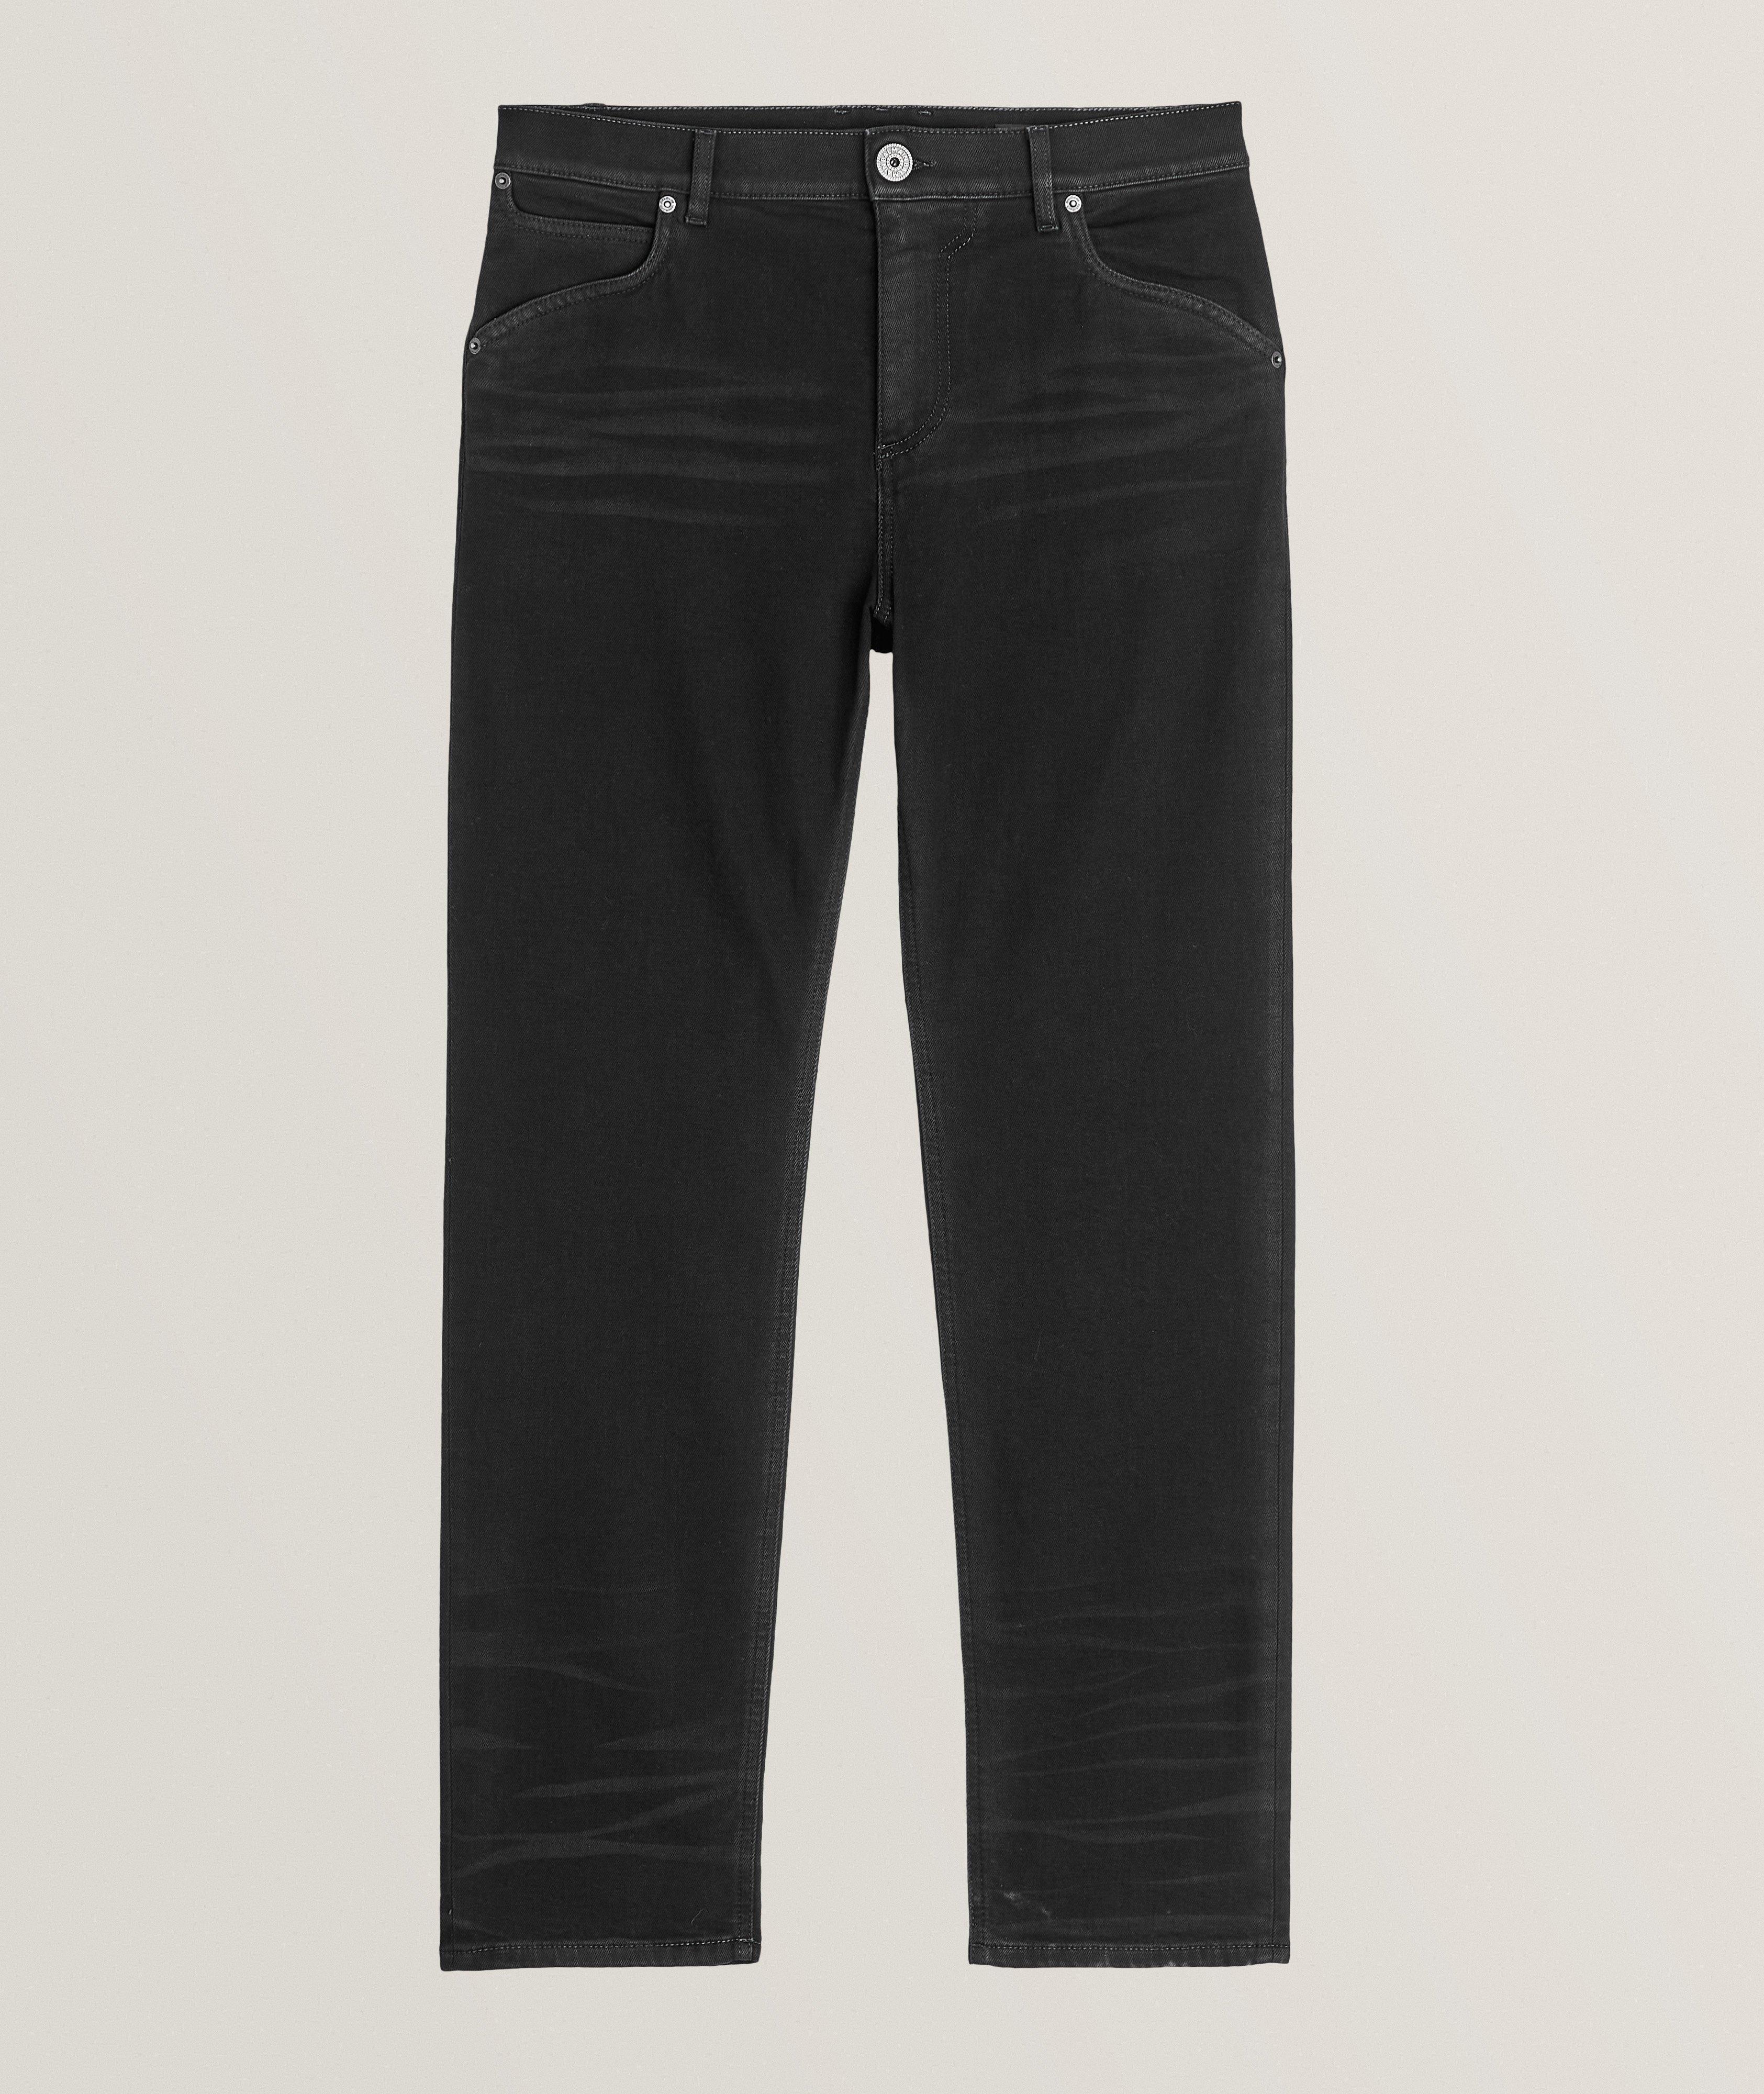 Washed Stretch-Cotton Jeans image 0